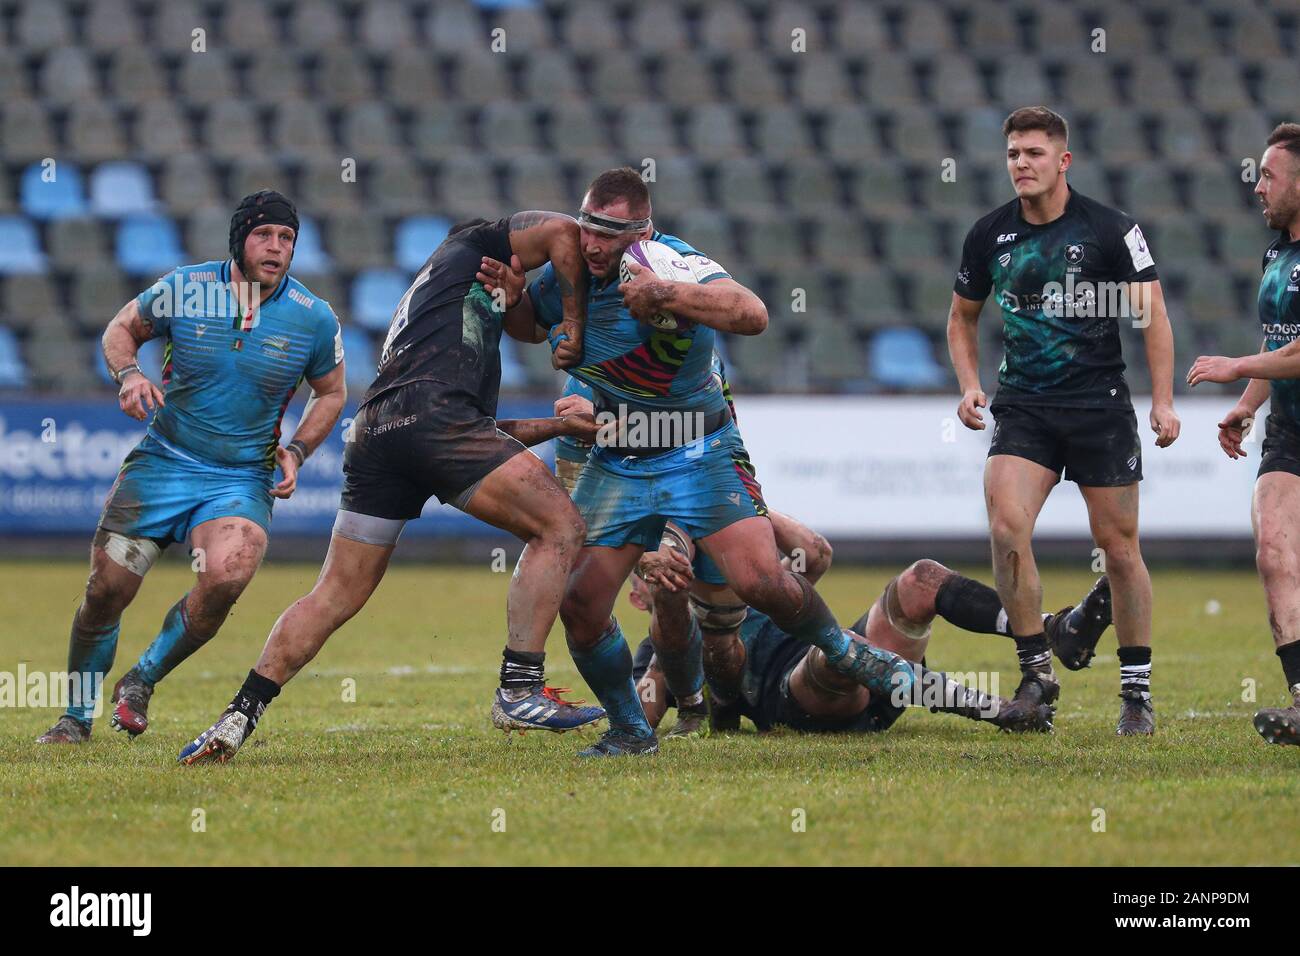 Parma Italy 18 Jan Andrea Lovotti Zebre During Zebre Rugby Vs Bristol Bears Rugby Challenge Cup Credit Lps Massimiliano Carnabuci Alamy Live News Stock Photo Alamy